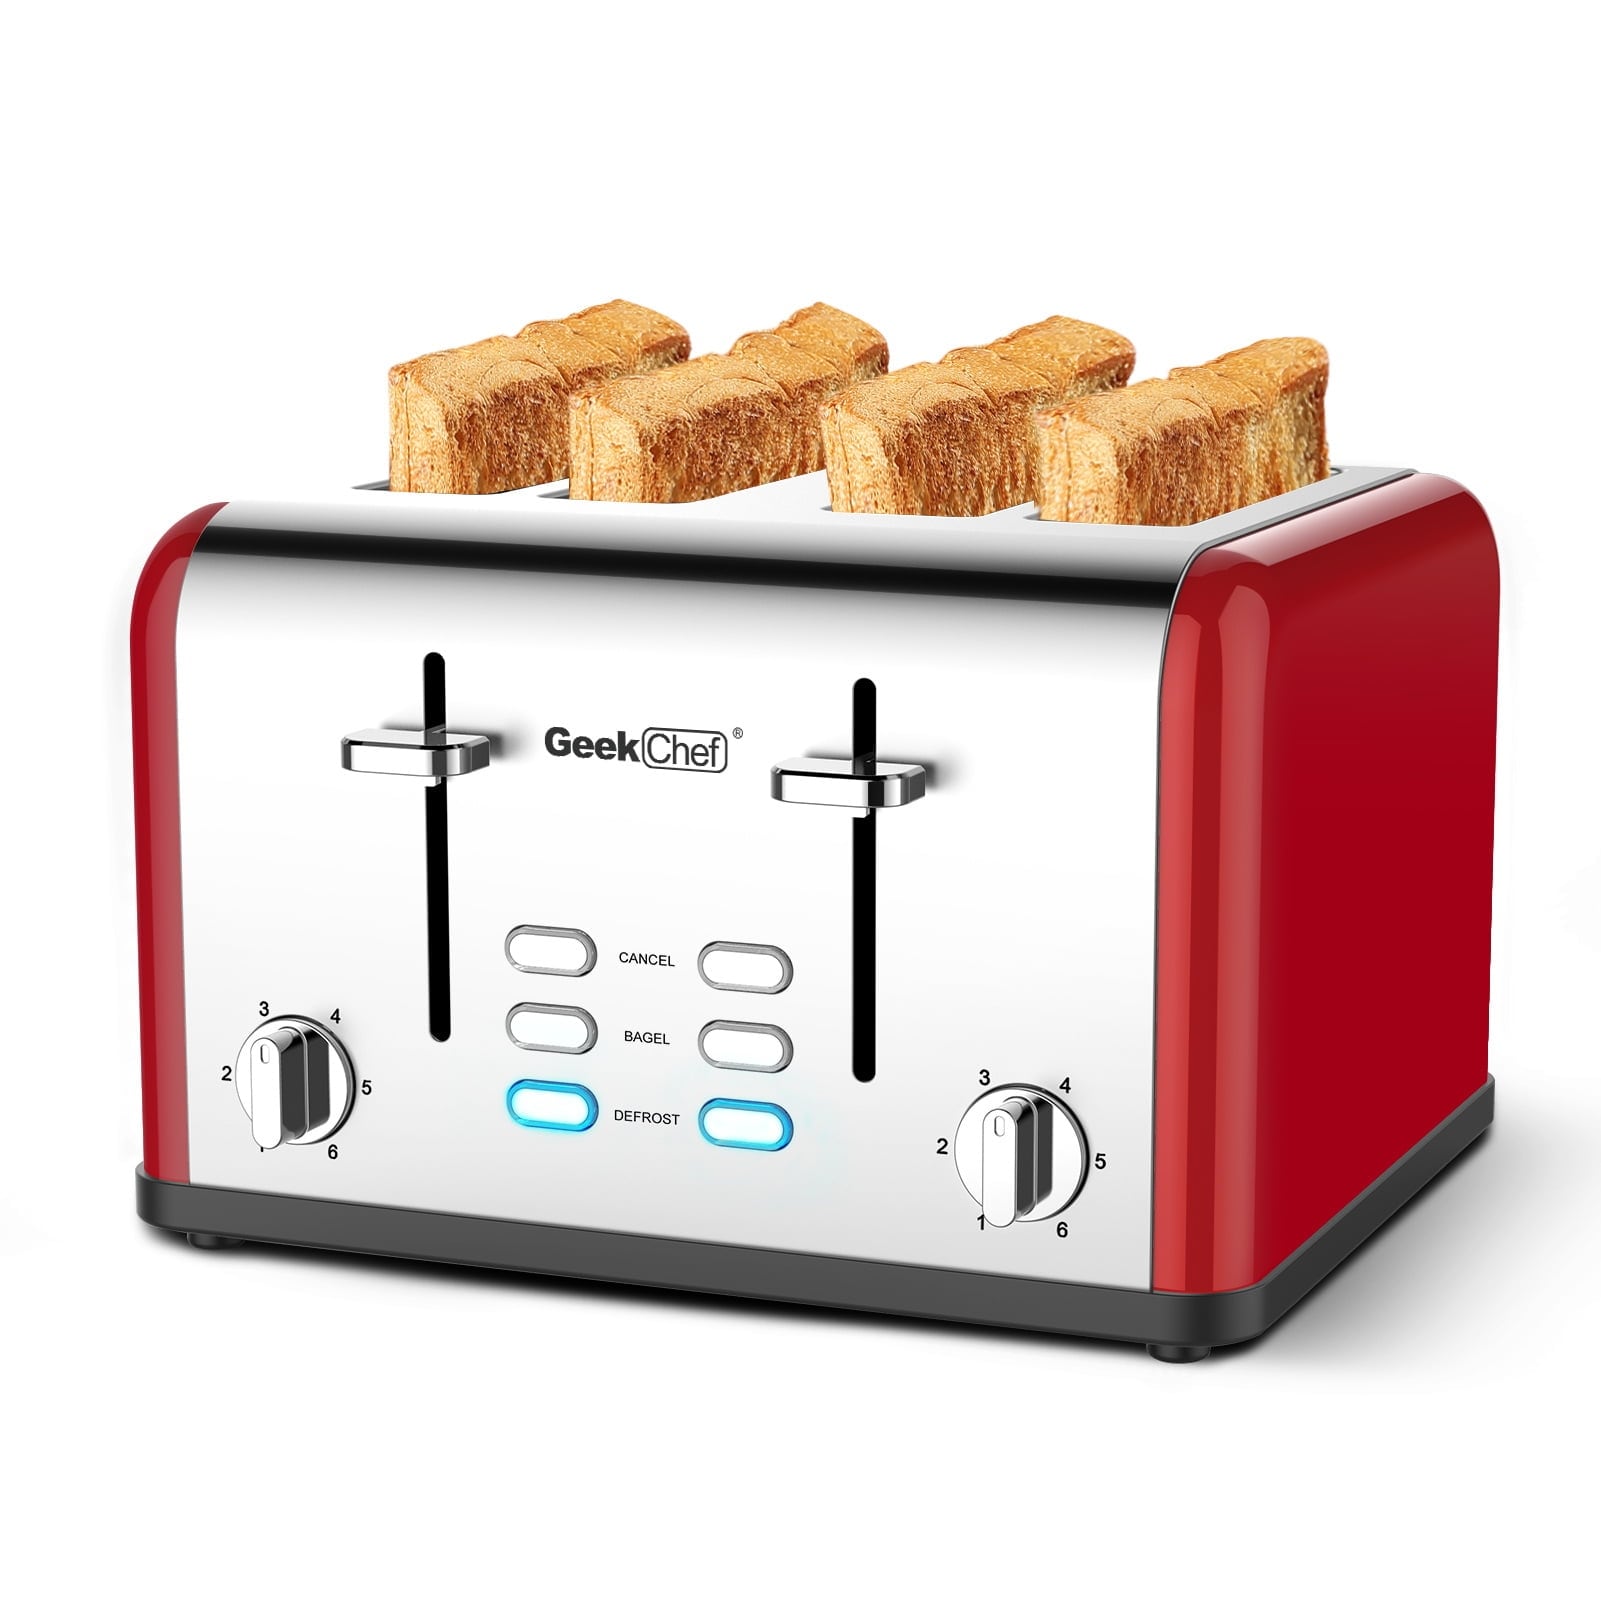 Extra-Wide Slot Toaster, Removable Crumb Trays, Au...